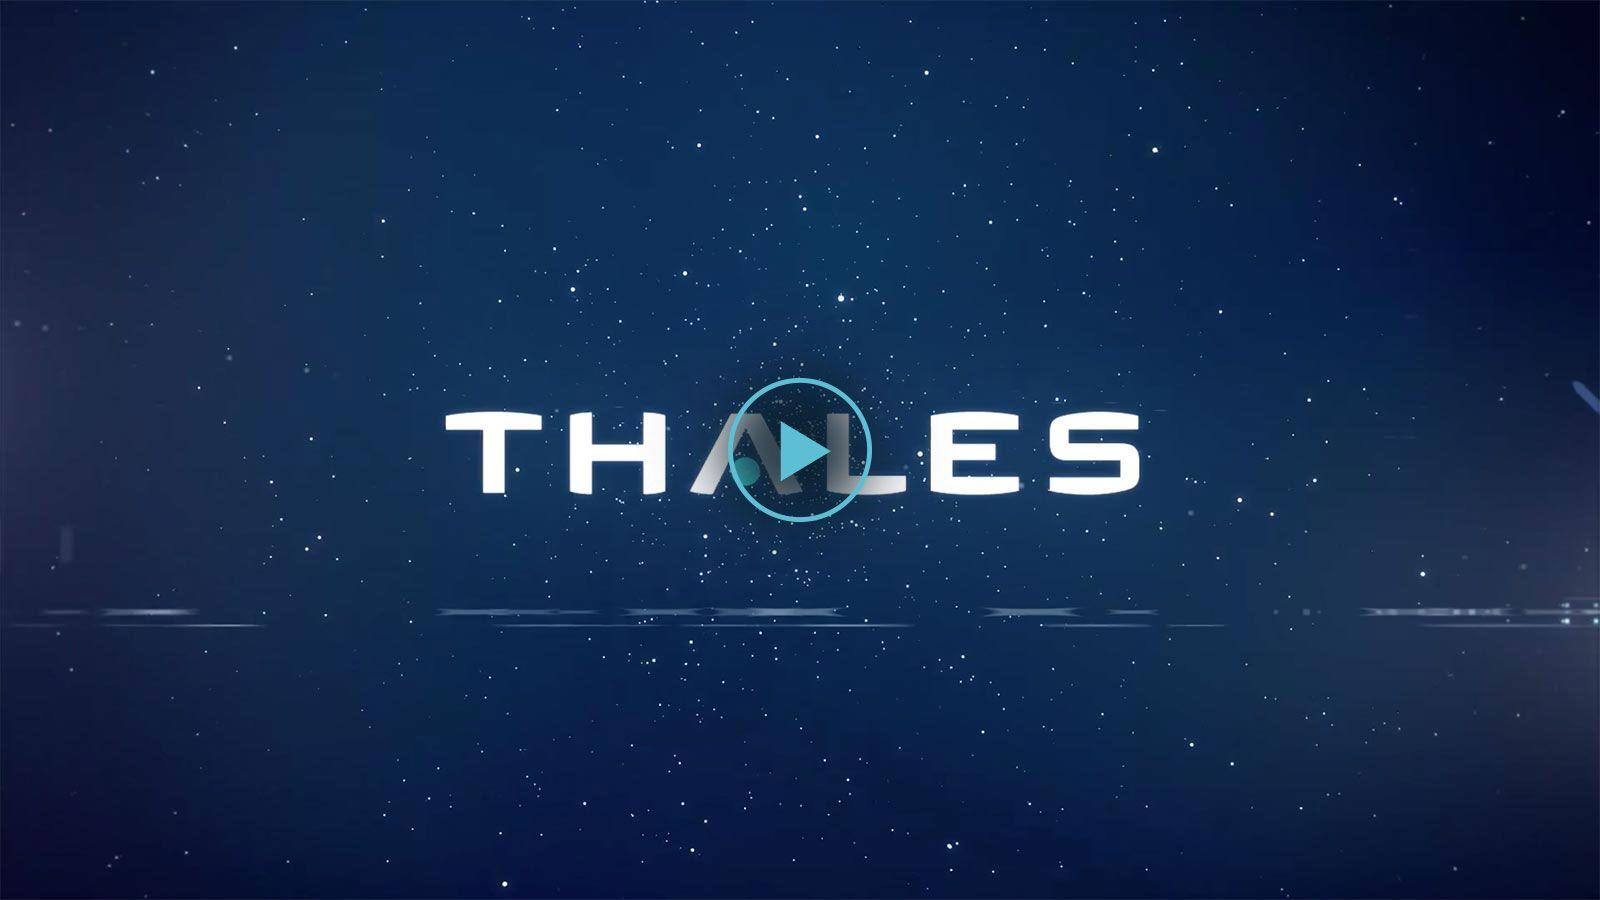 Thales Logo - Jobs at Thales Group. Careers in Engineering and Technology